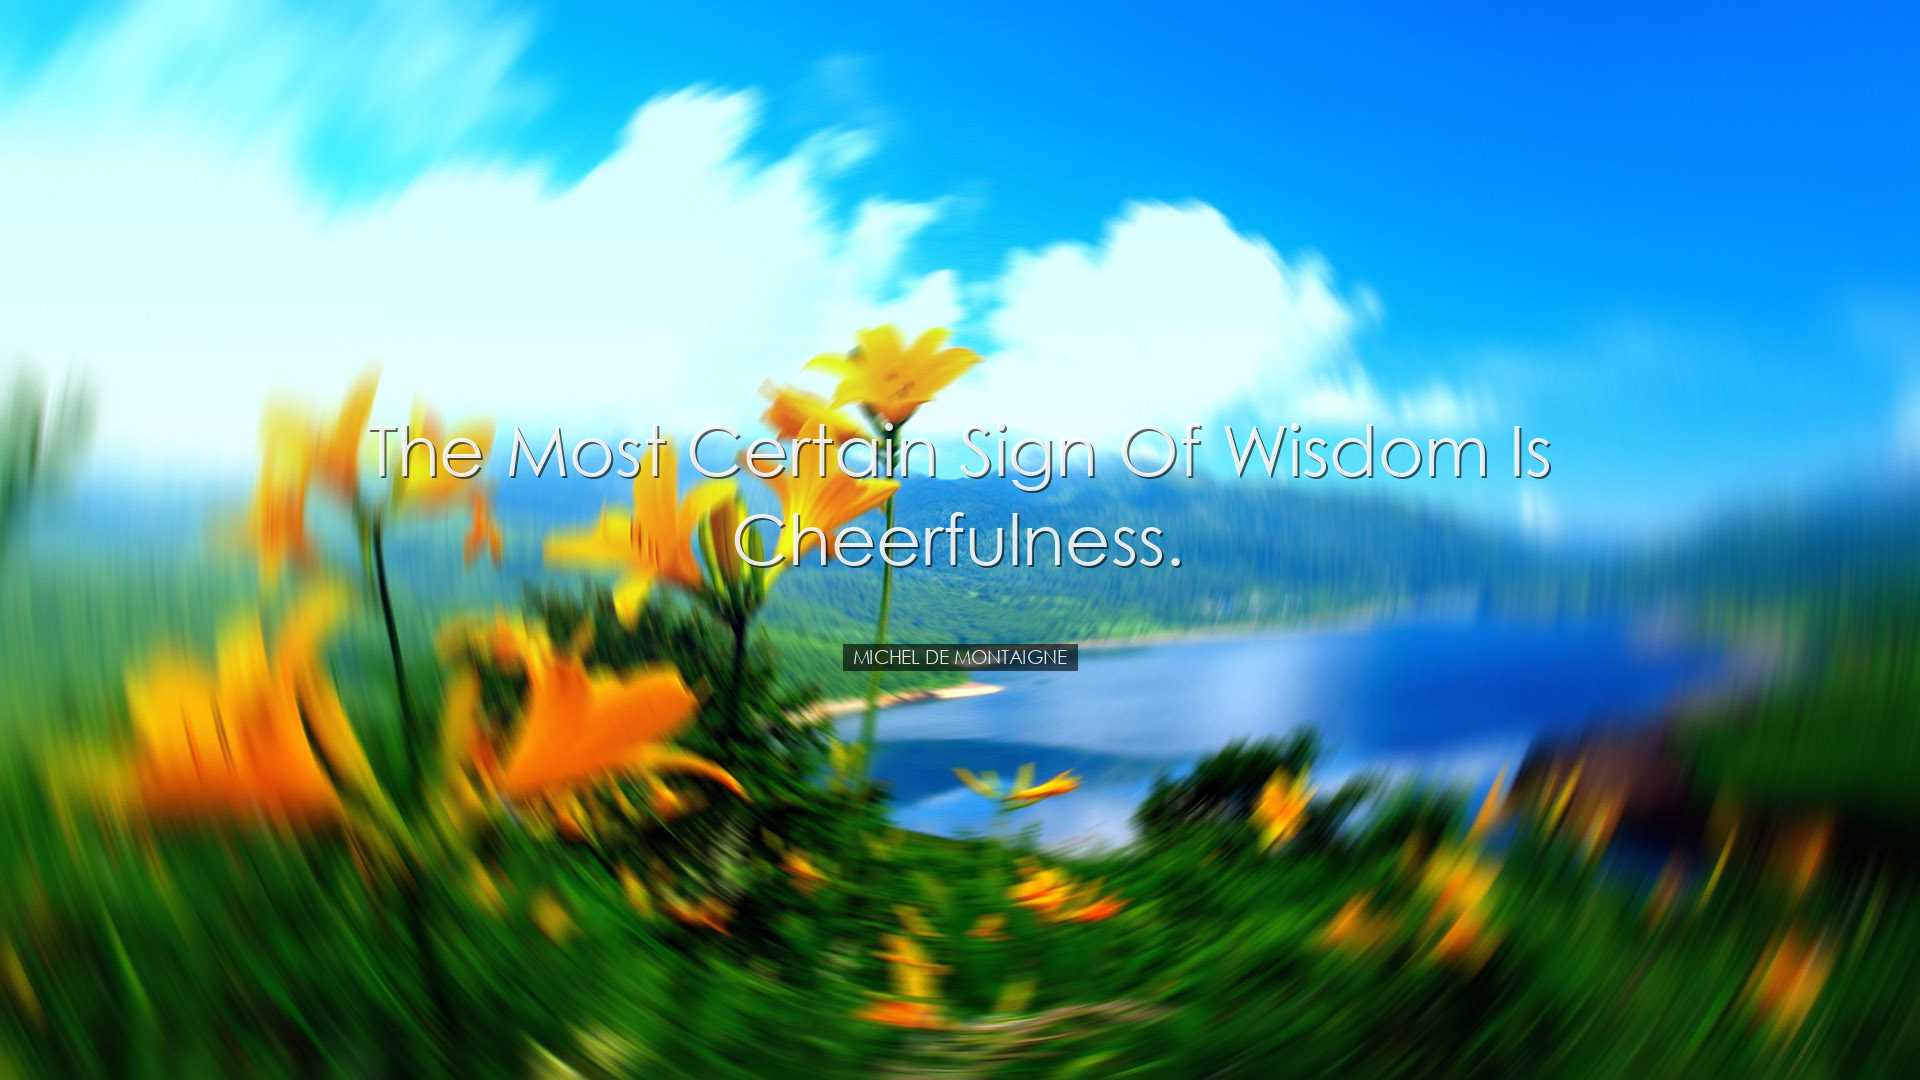 The most certain sign of wisdom is cheerfulness. - Michel de Monta